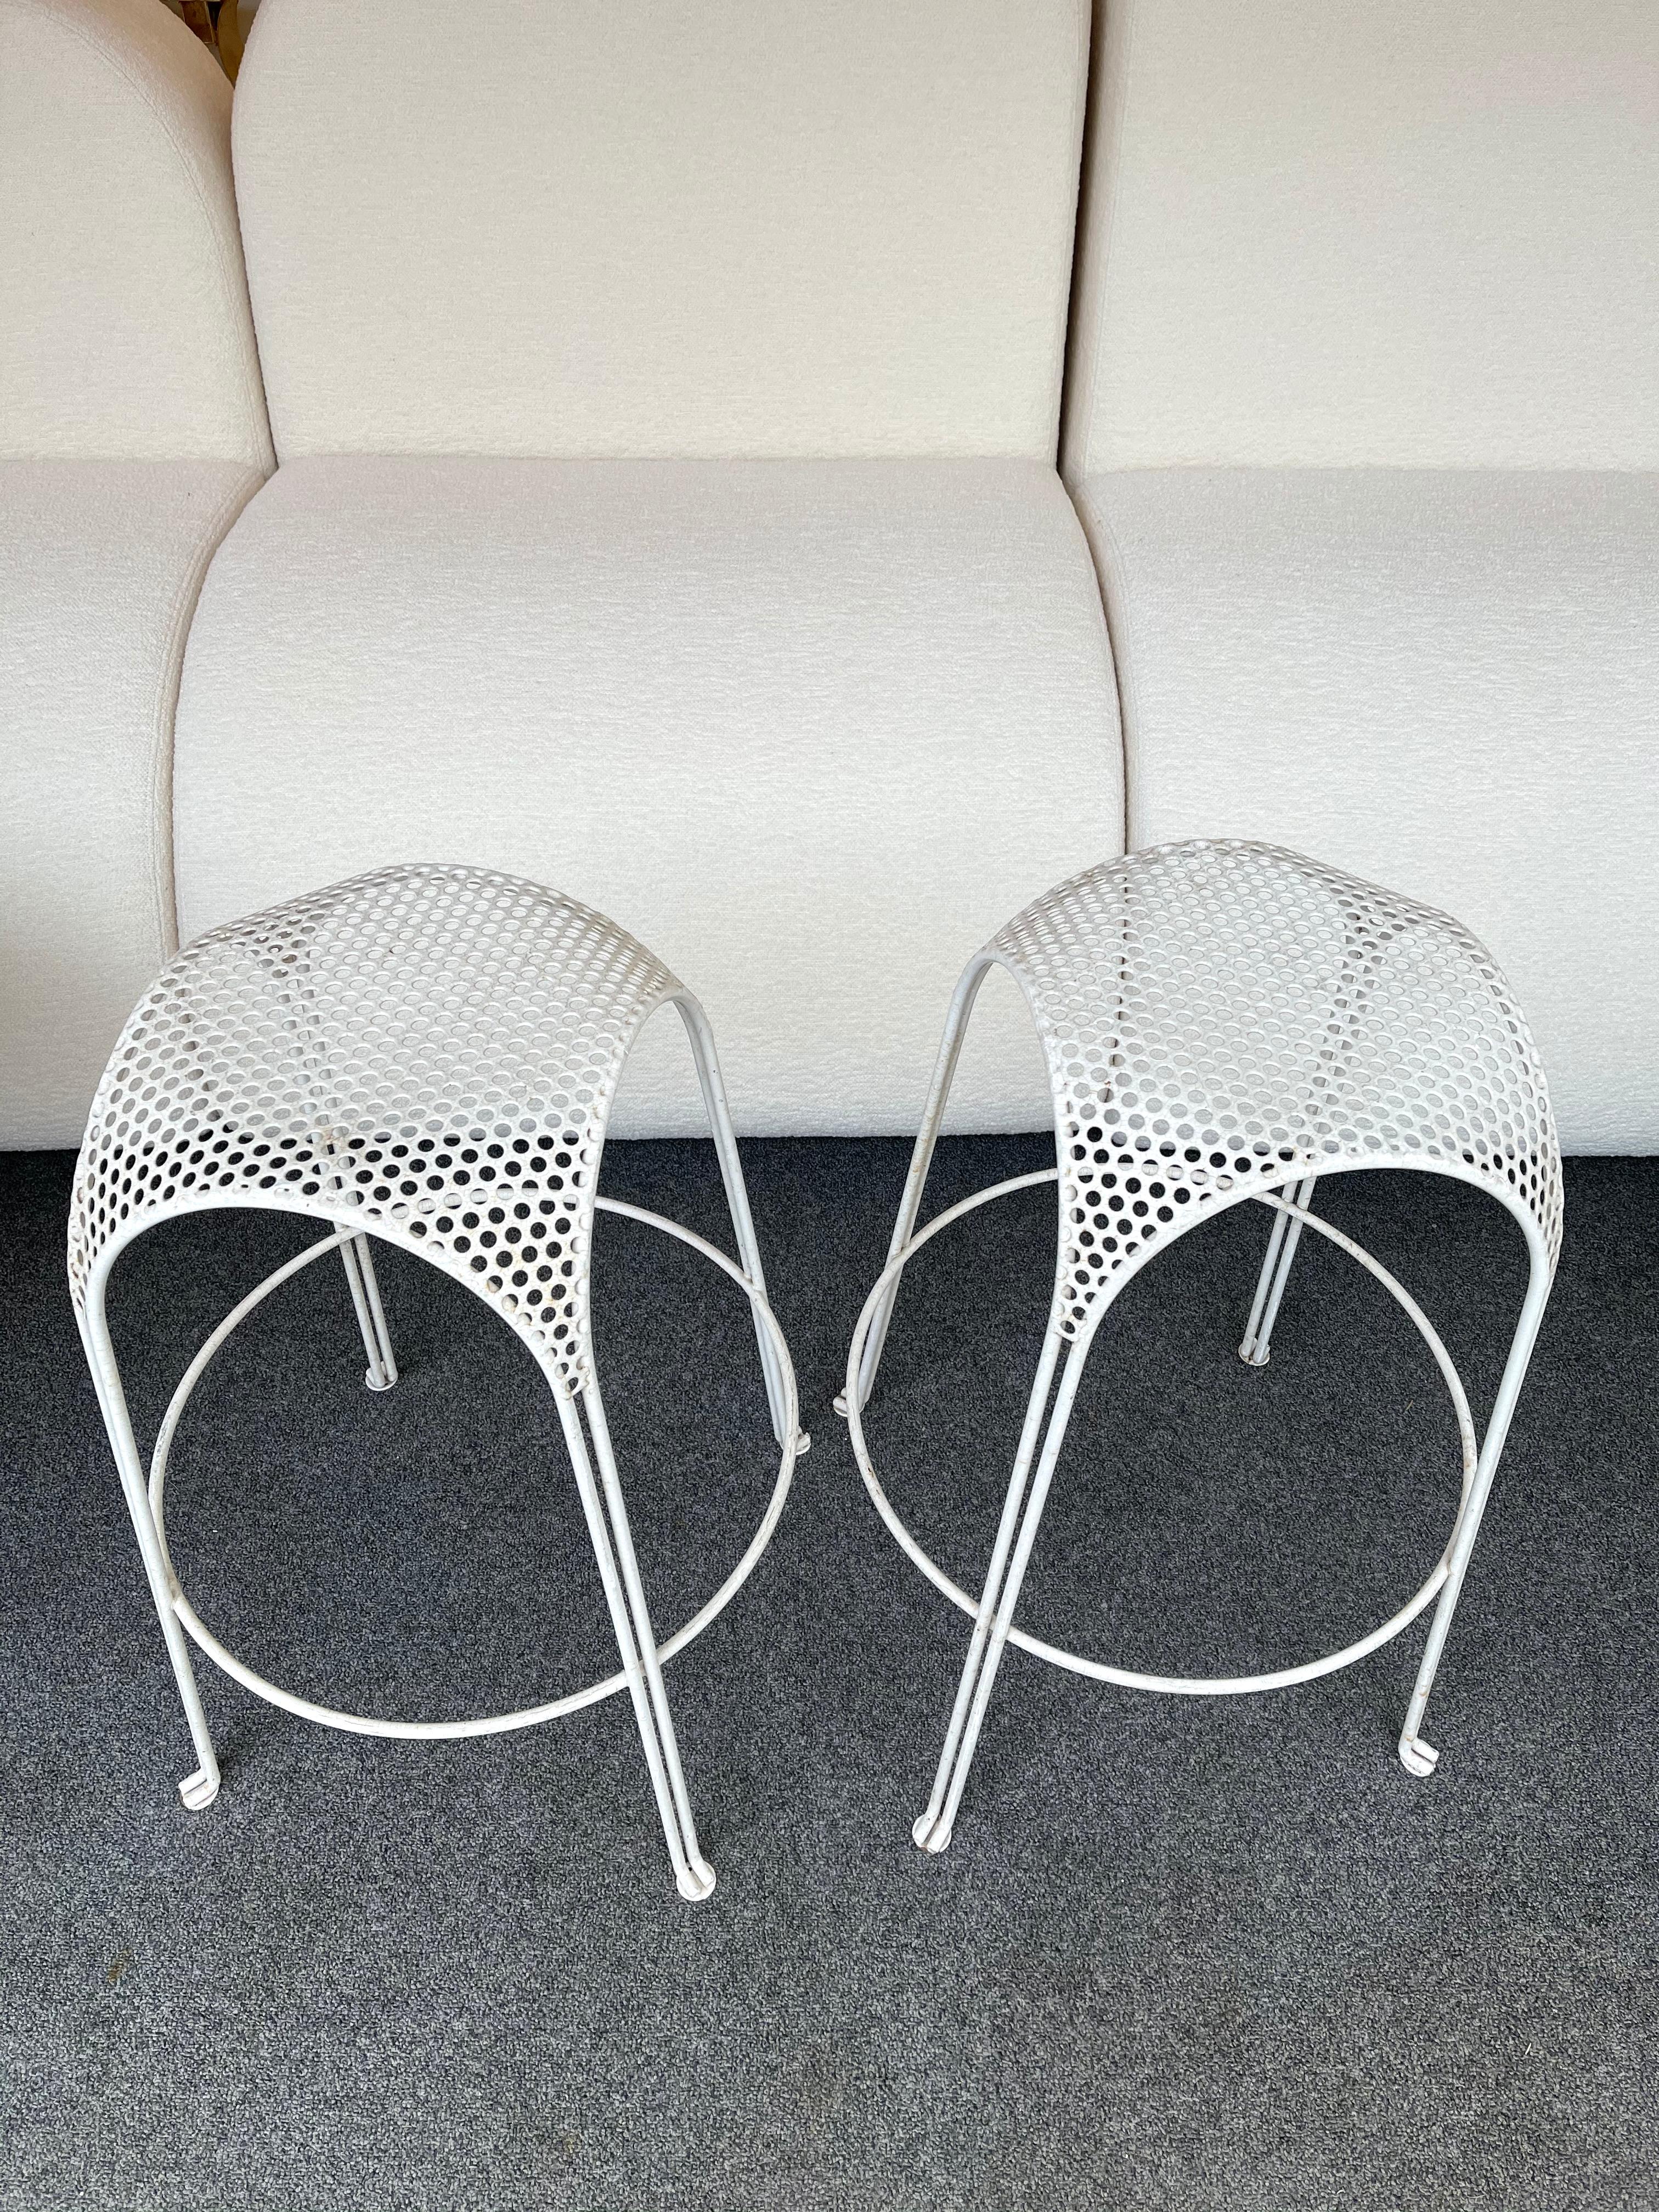 Pair of Bar Stools Metal Perforated by Maurizio Tempestini, Italy, 1950s For Sale 2